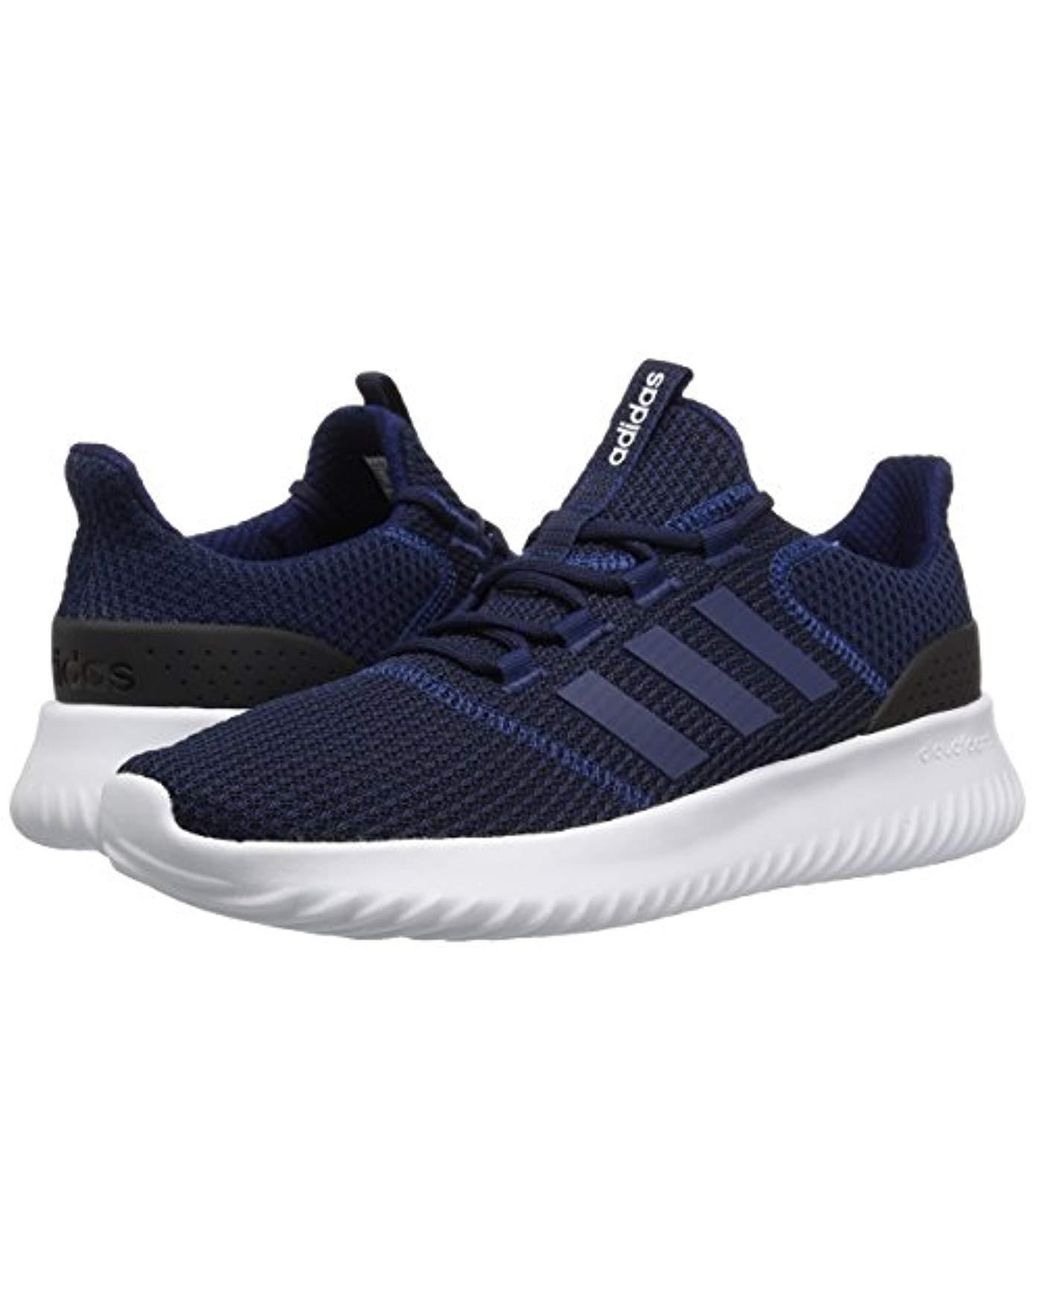 adidas cloudfoam ultimate running shoes